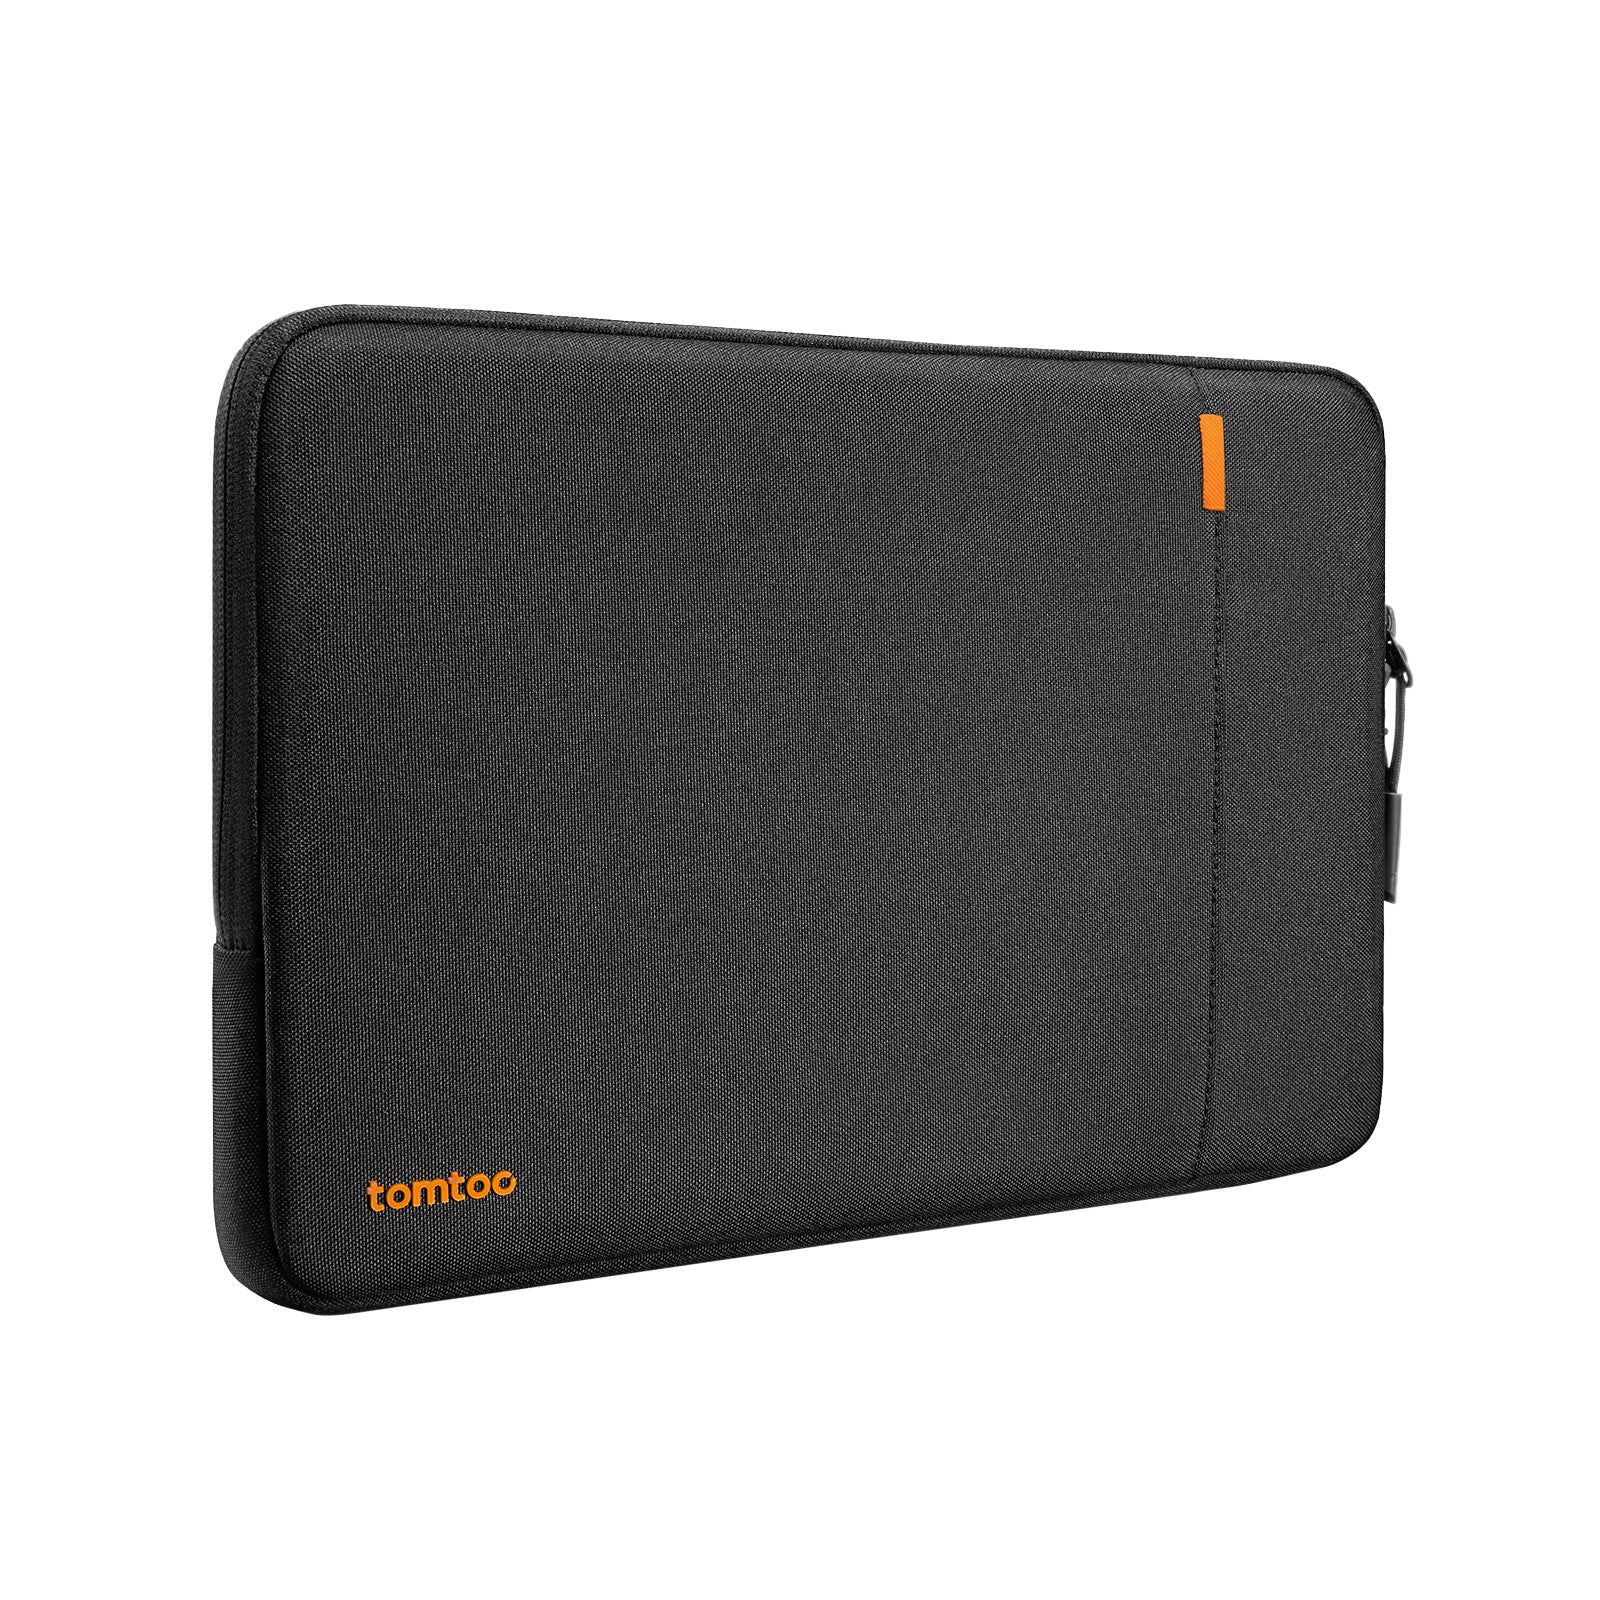 Defender-A13 Laptop Sleeve for 15.6 inch universal laptop